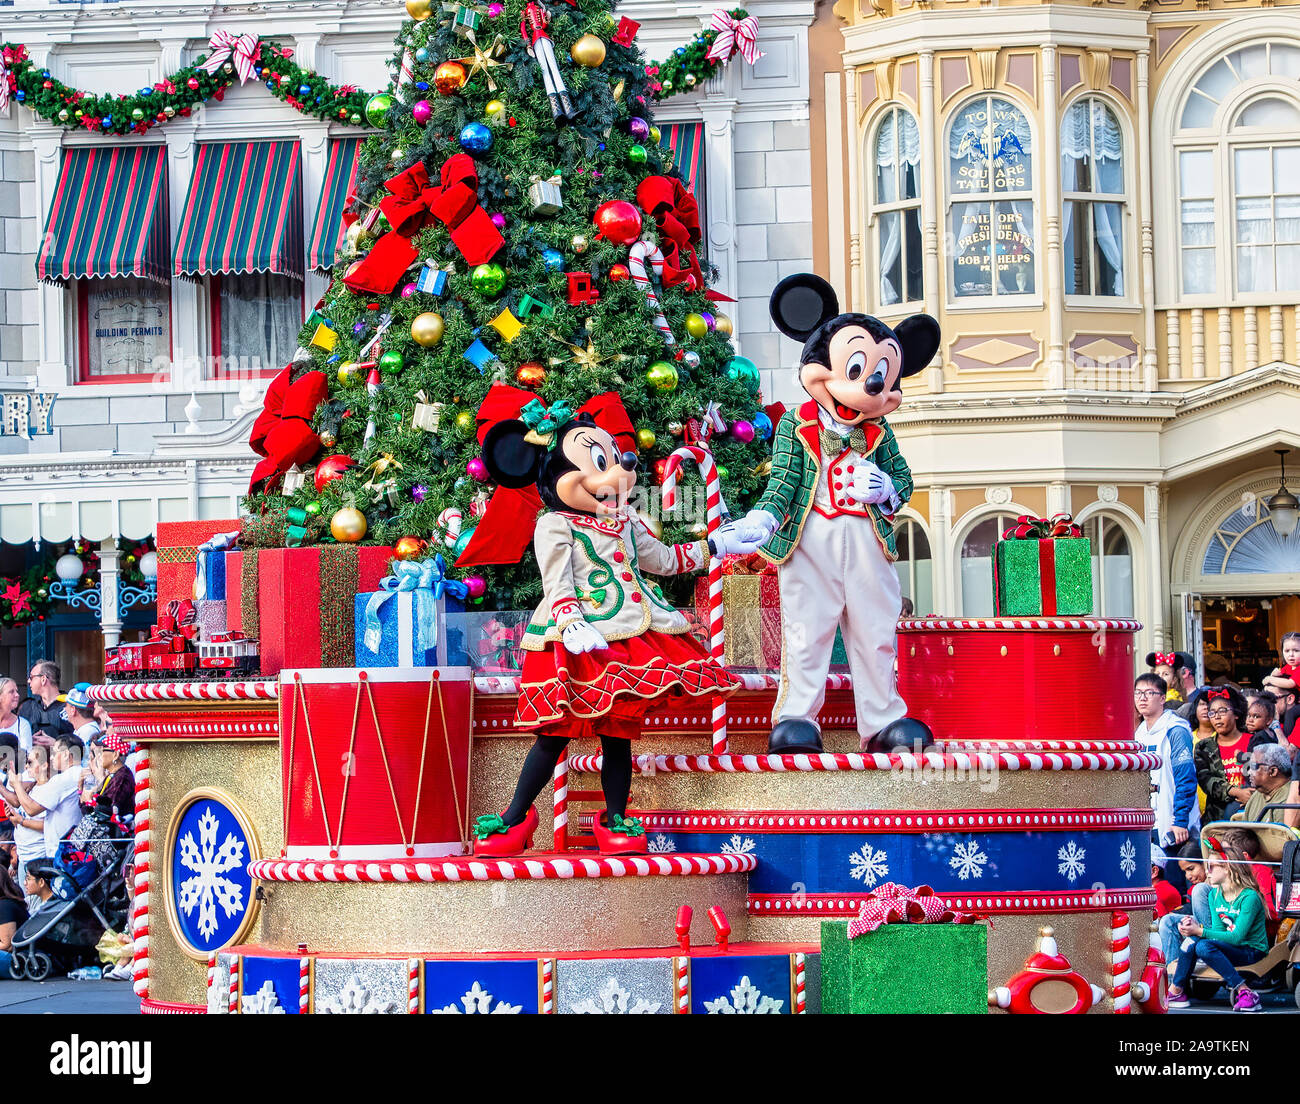 Mickey and Minnie Mouse in Christmas outfits in the Christmastime Parade Stock Photo